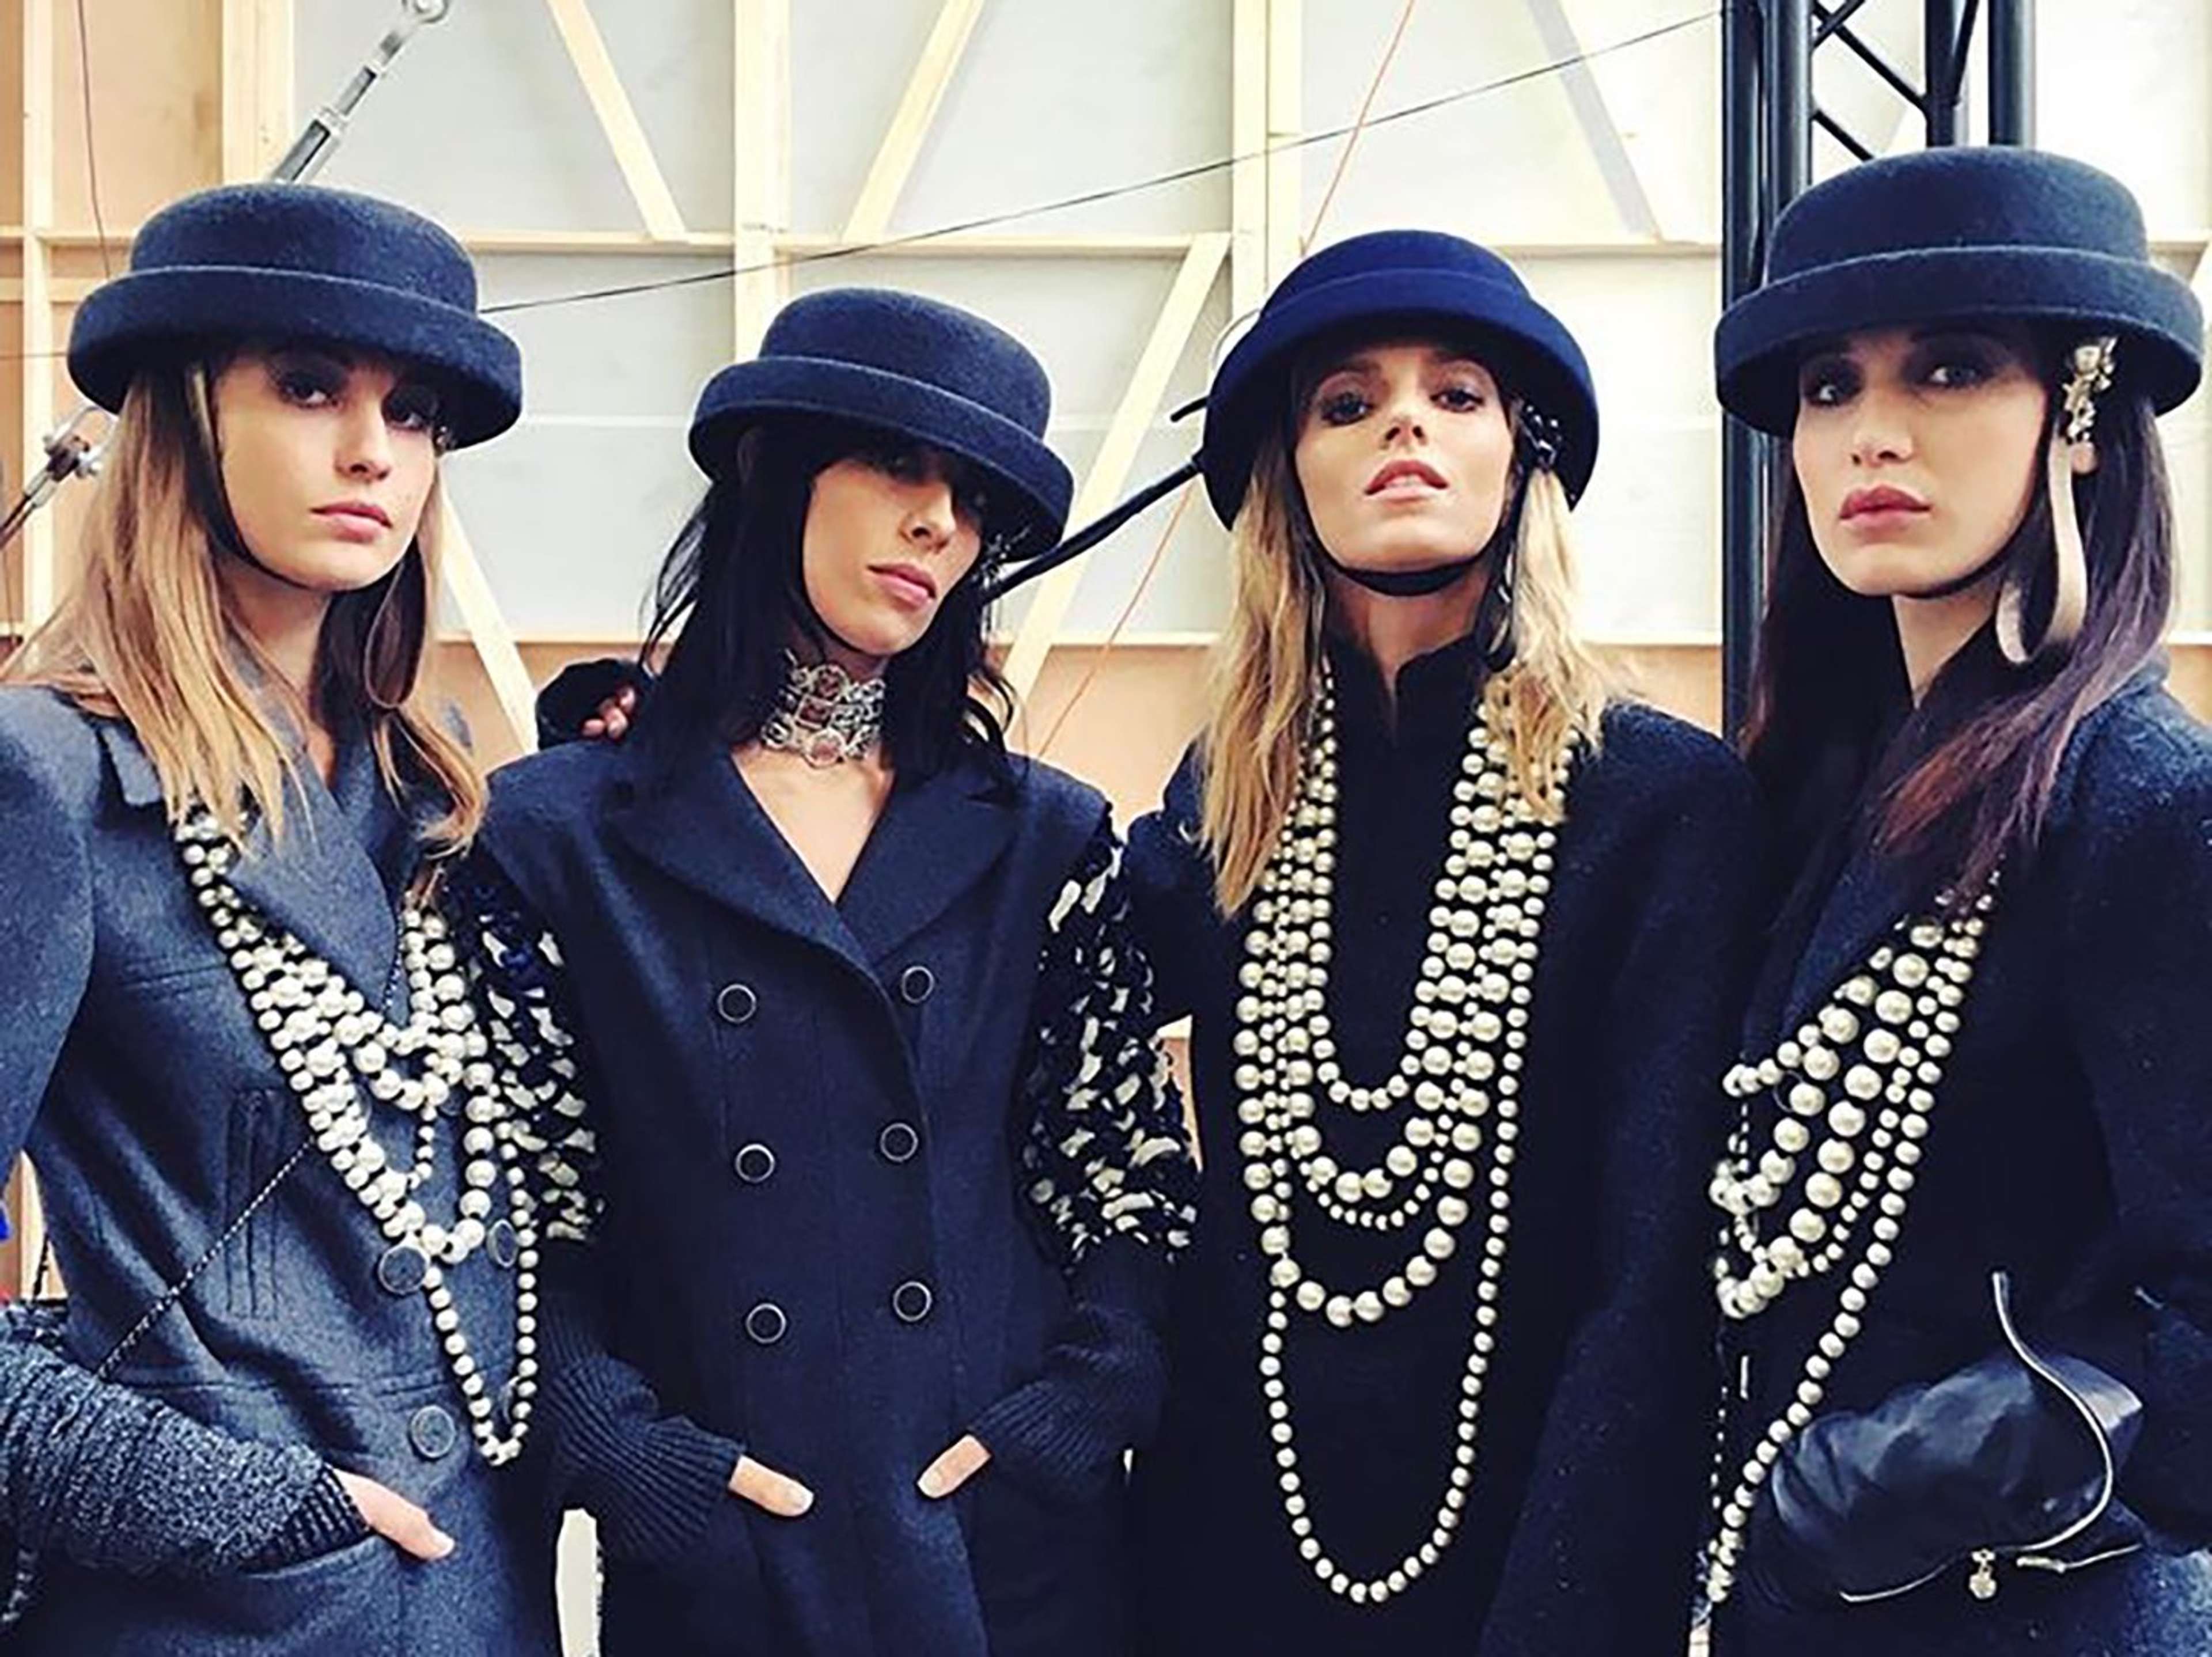 An image of four models, all dressed in black, clad in many pieces of Chanel costume jewellery.